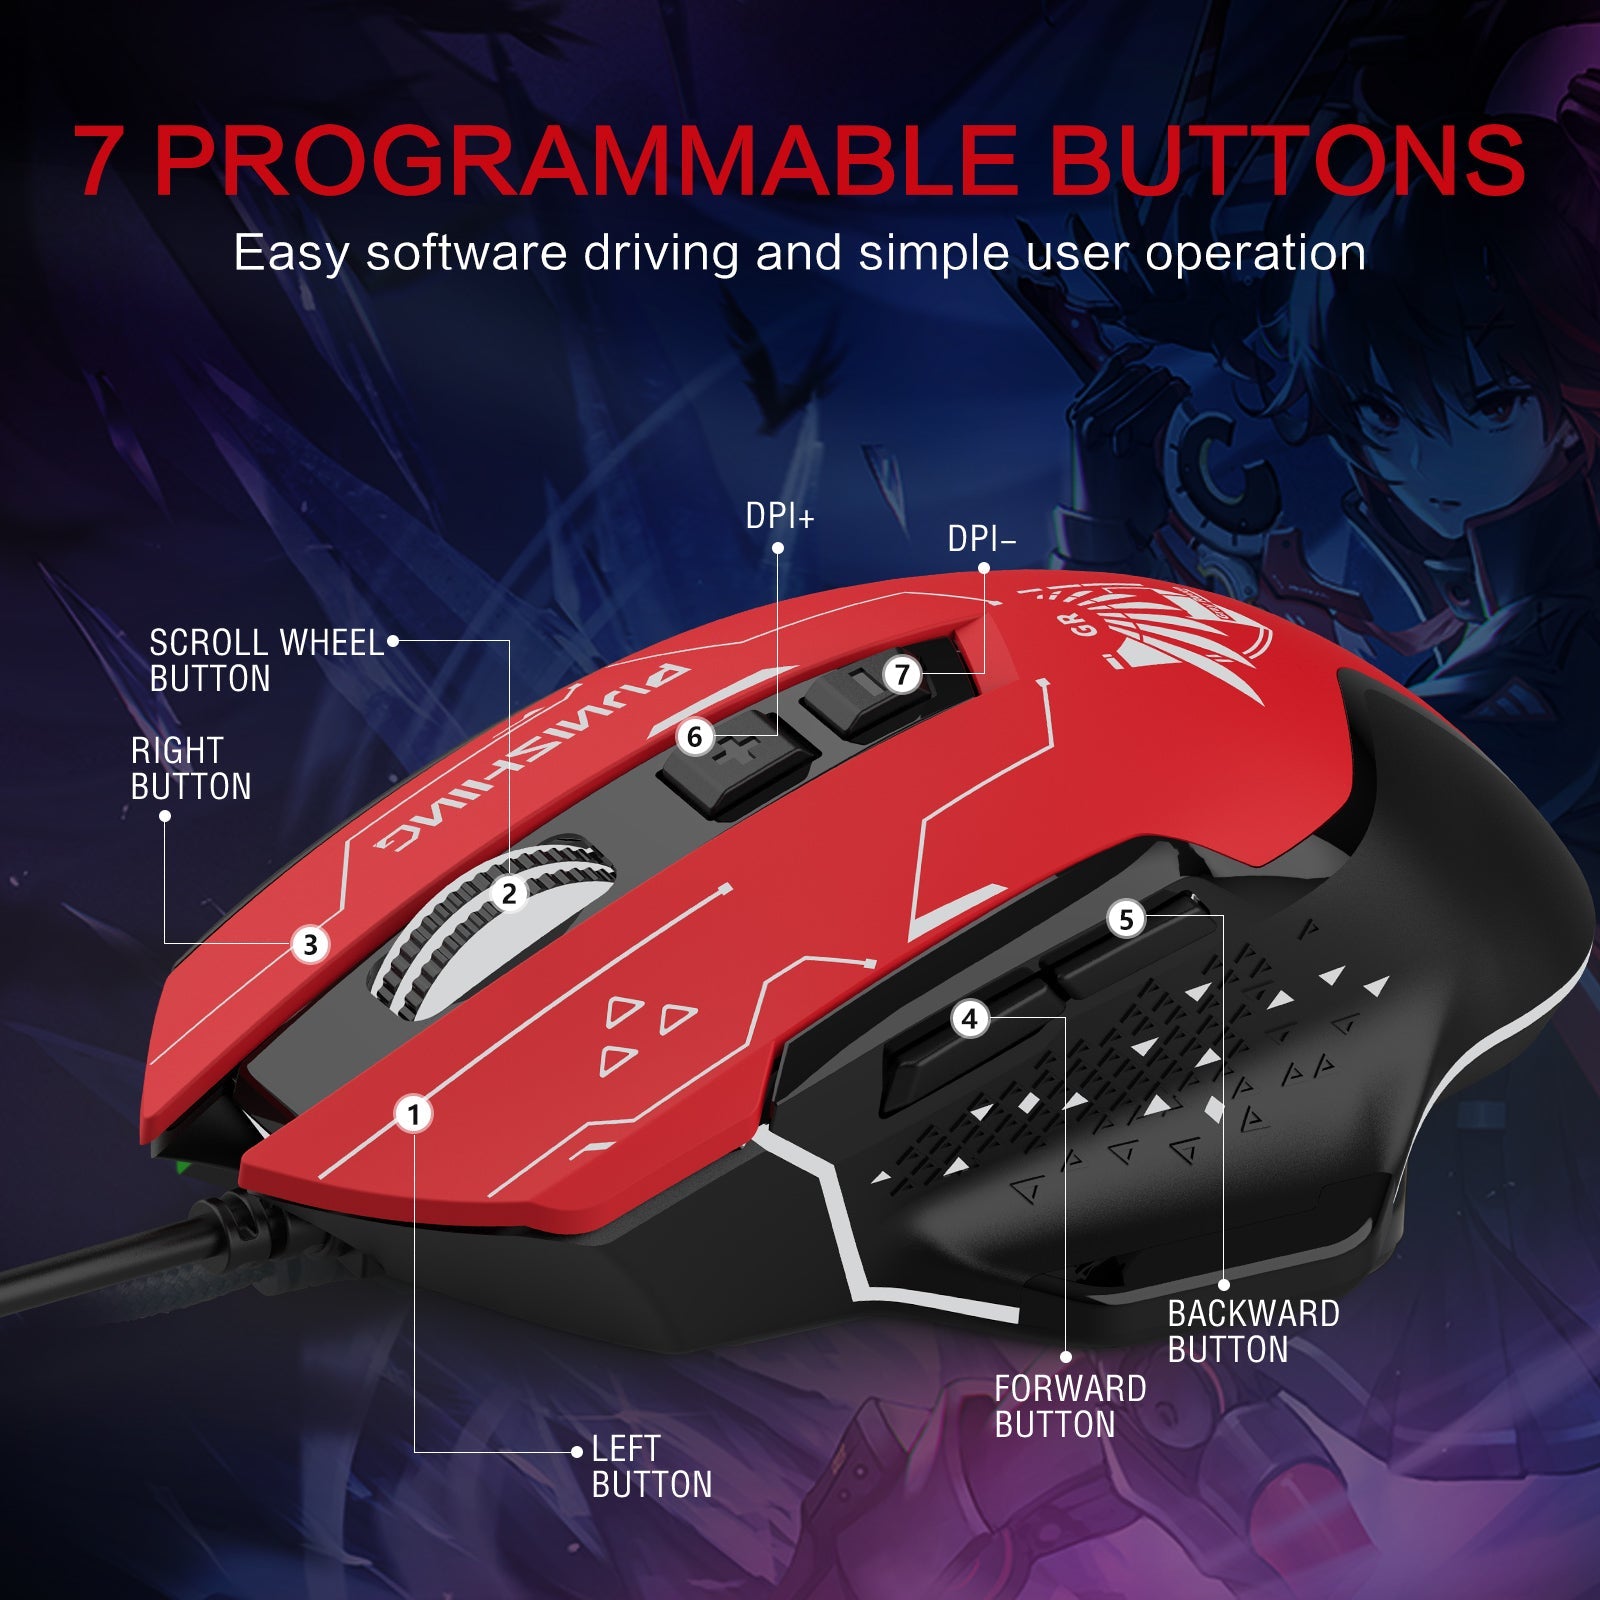 GTRACING X PGR: SPECIAL GAMING MOUSE - GTRACING